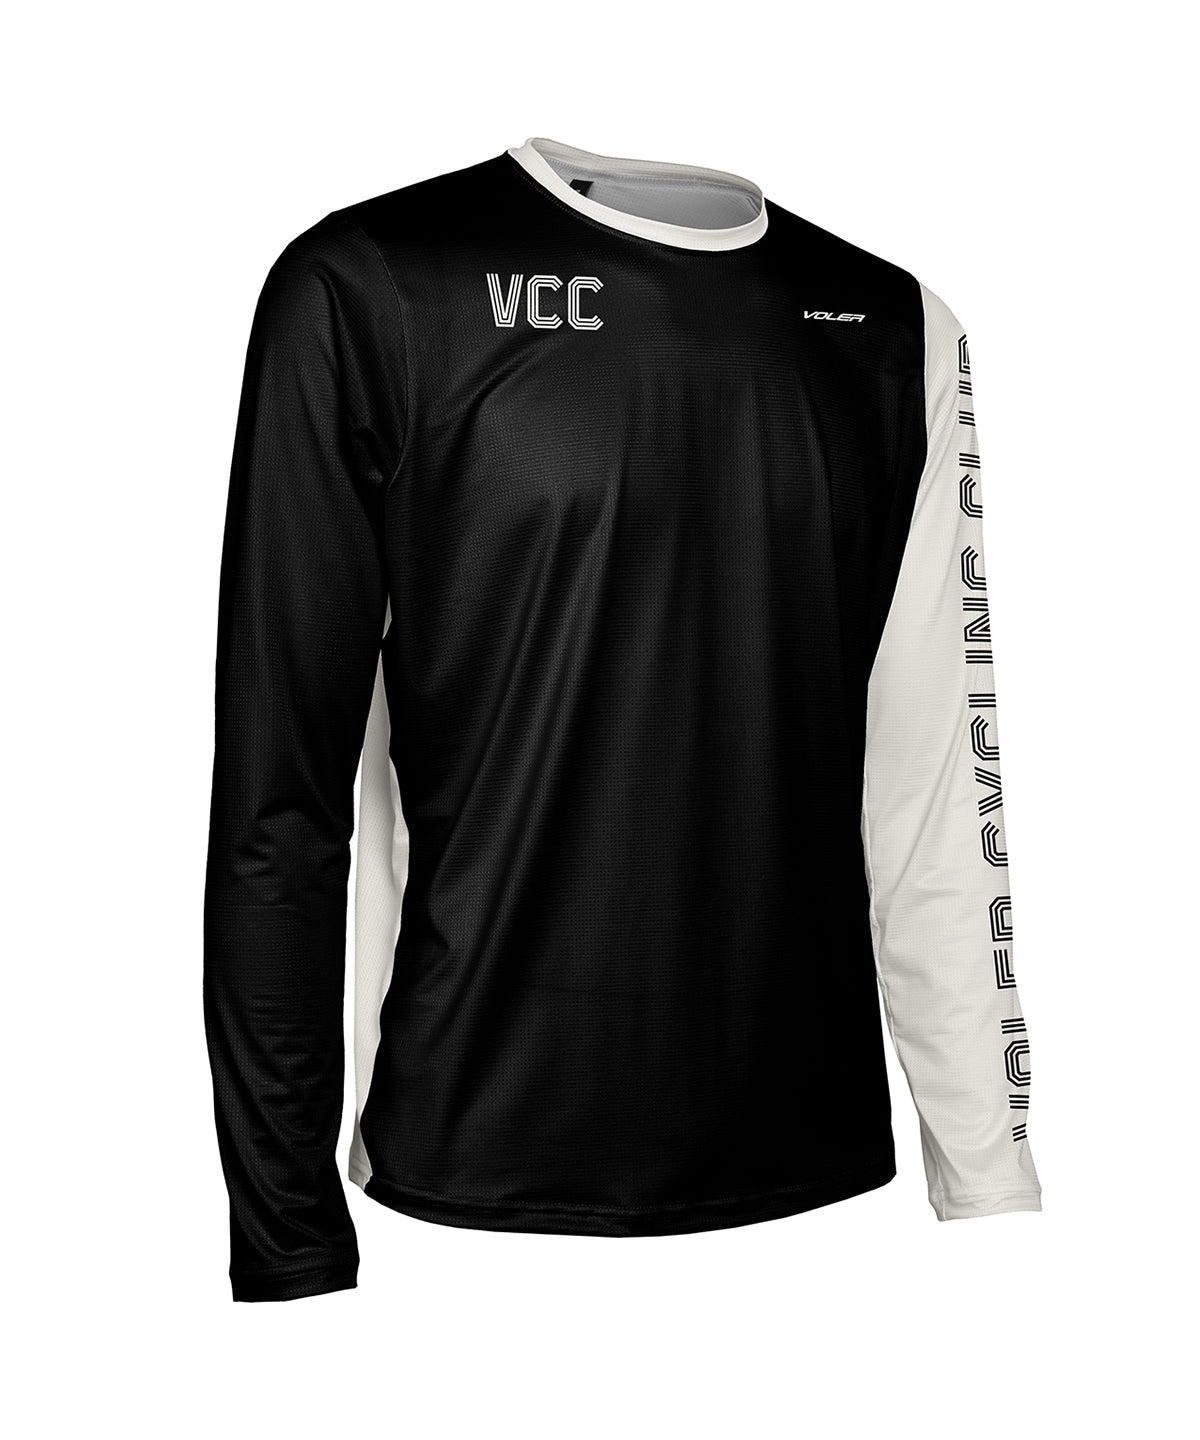 M. ENDURANCE AIR LS TEE - VCC MEMBERS ONLY